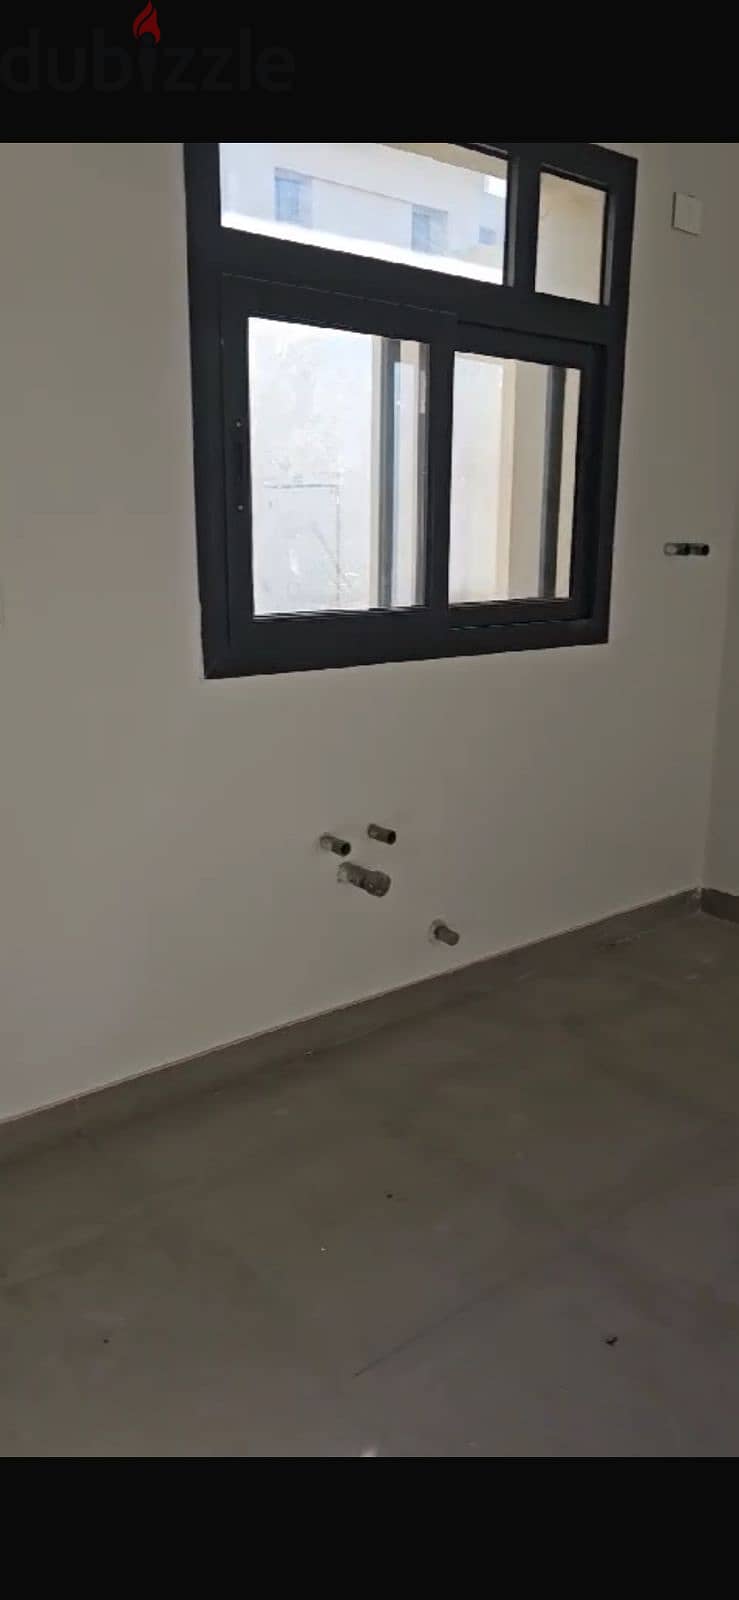 Duplex 175 sqm, immediate receipt, fully finished, next to the International Medical Center in Shorouk City, Al Burouj Compound 2